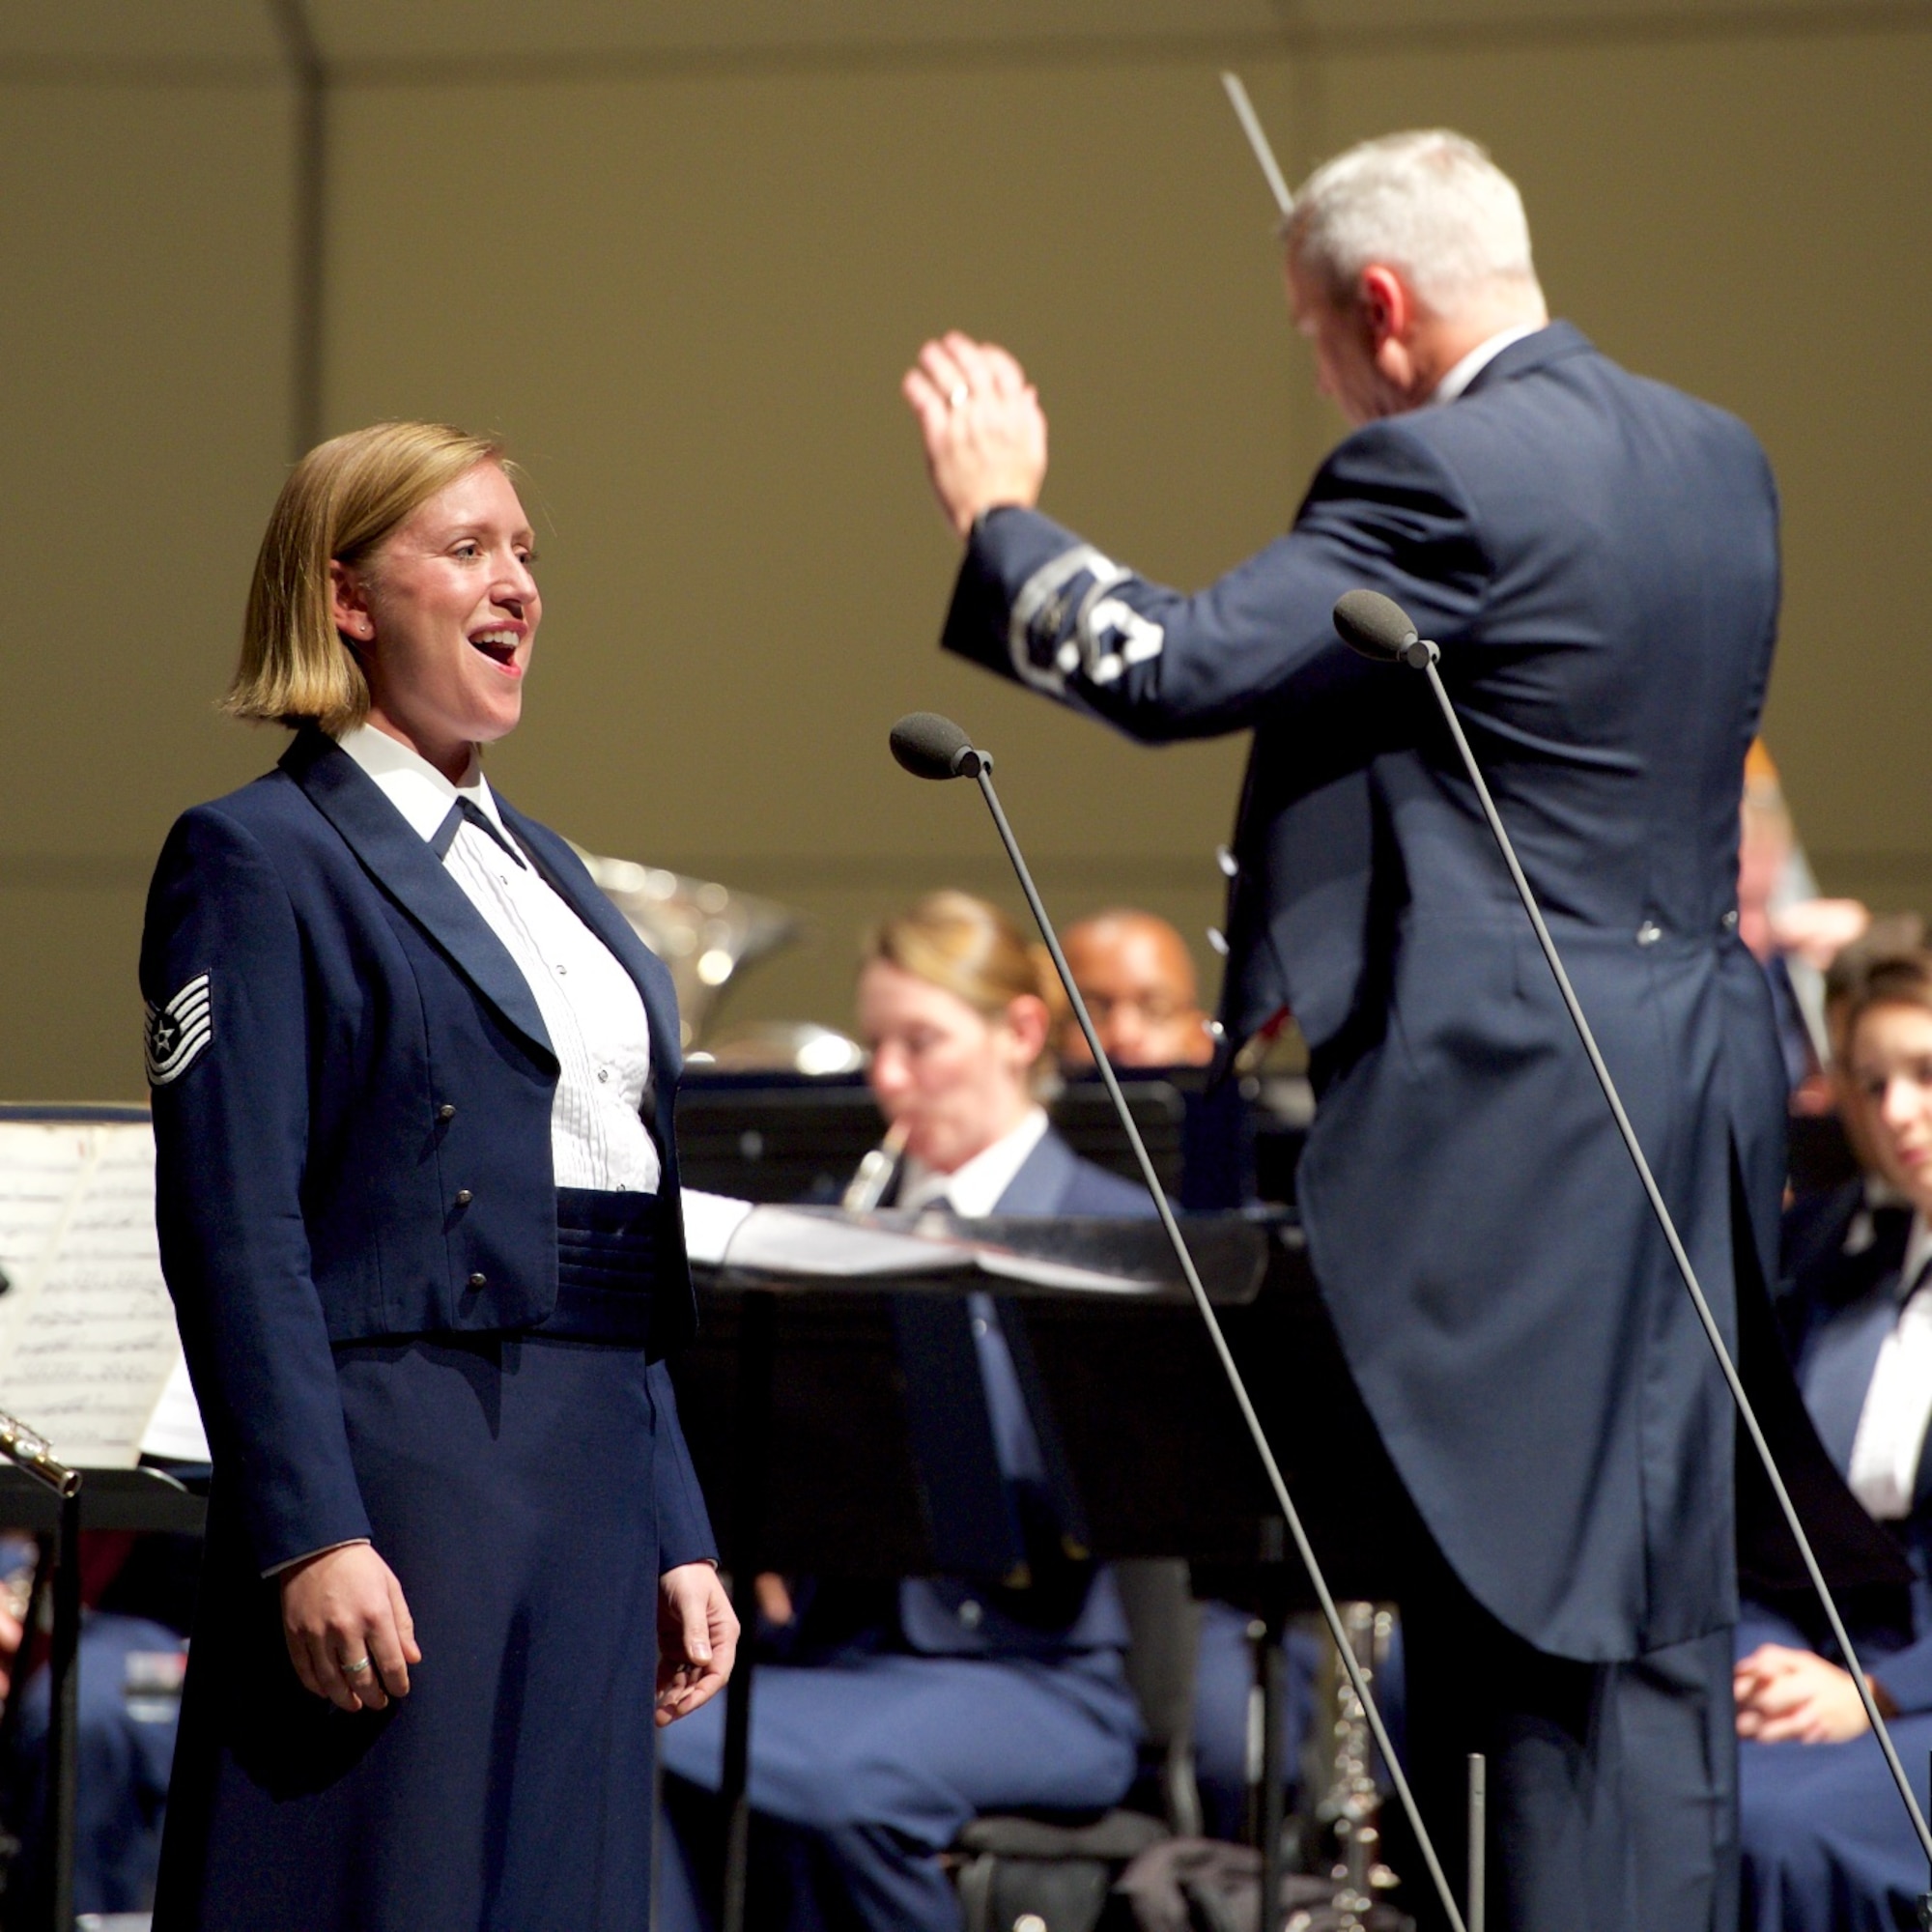 Technical Sgt. Mandy Harper performs as a tour soloist with the Concert Band (U.S. Air Force Photo by CMSgt Bob Kamholz)